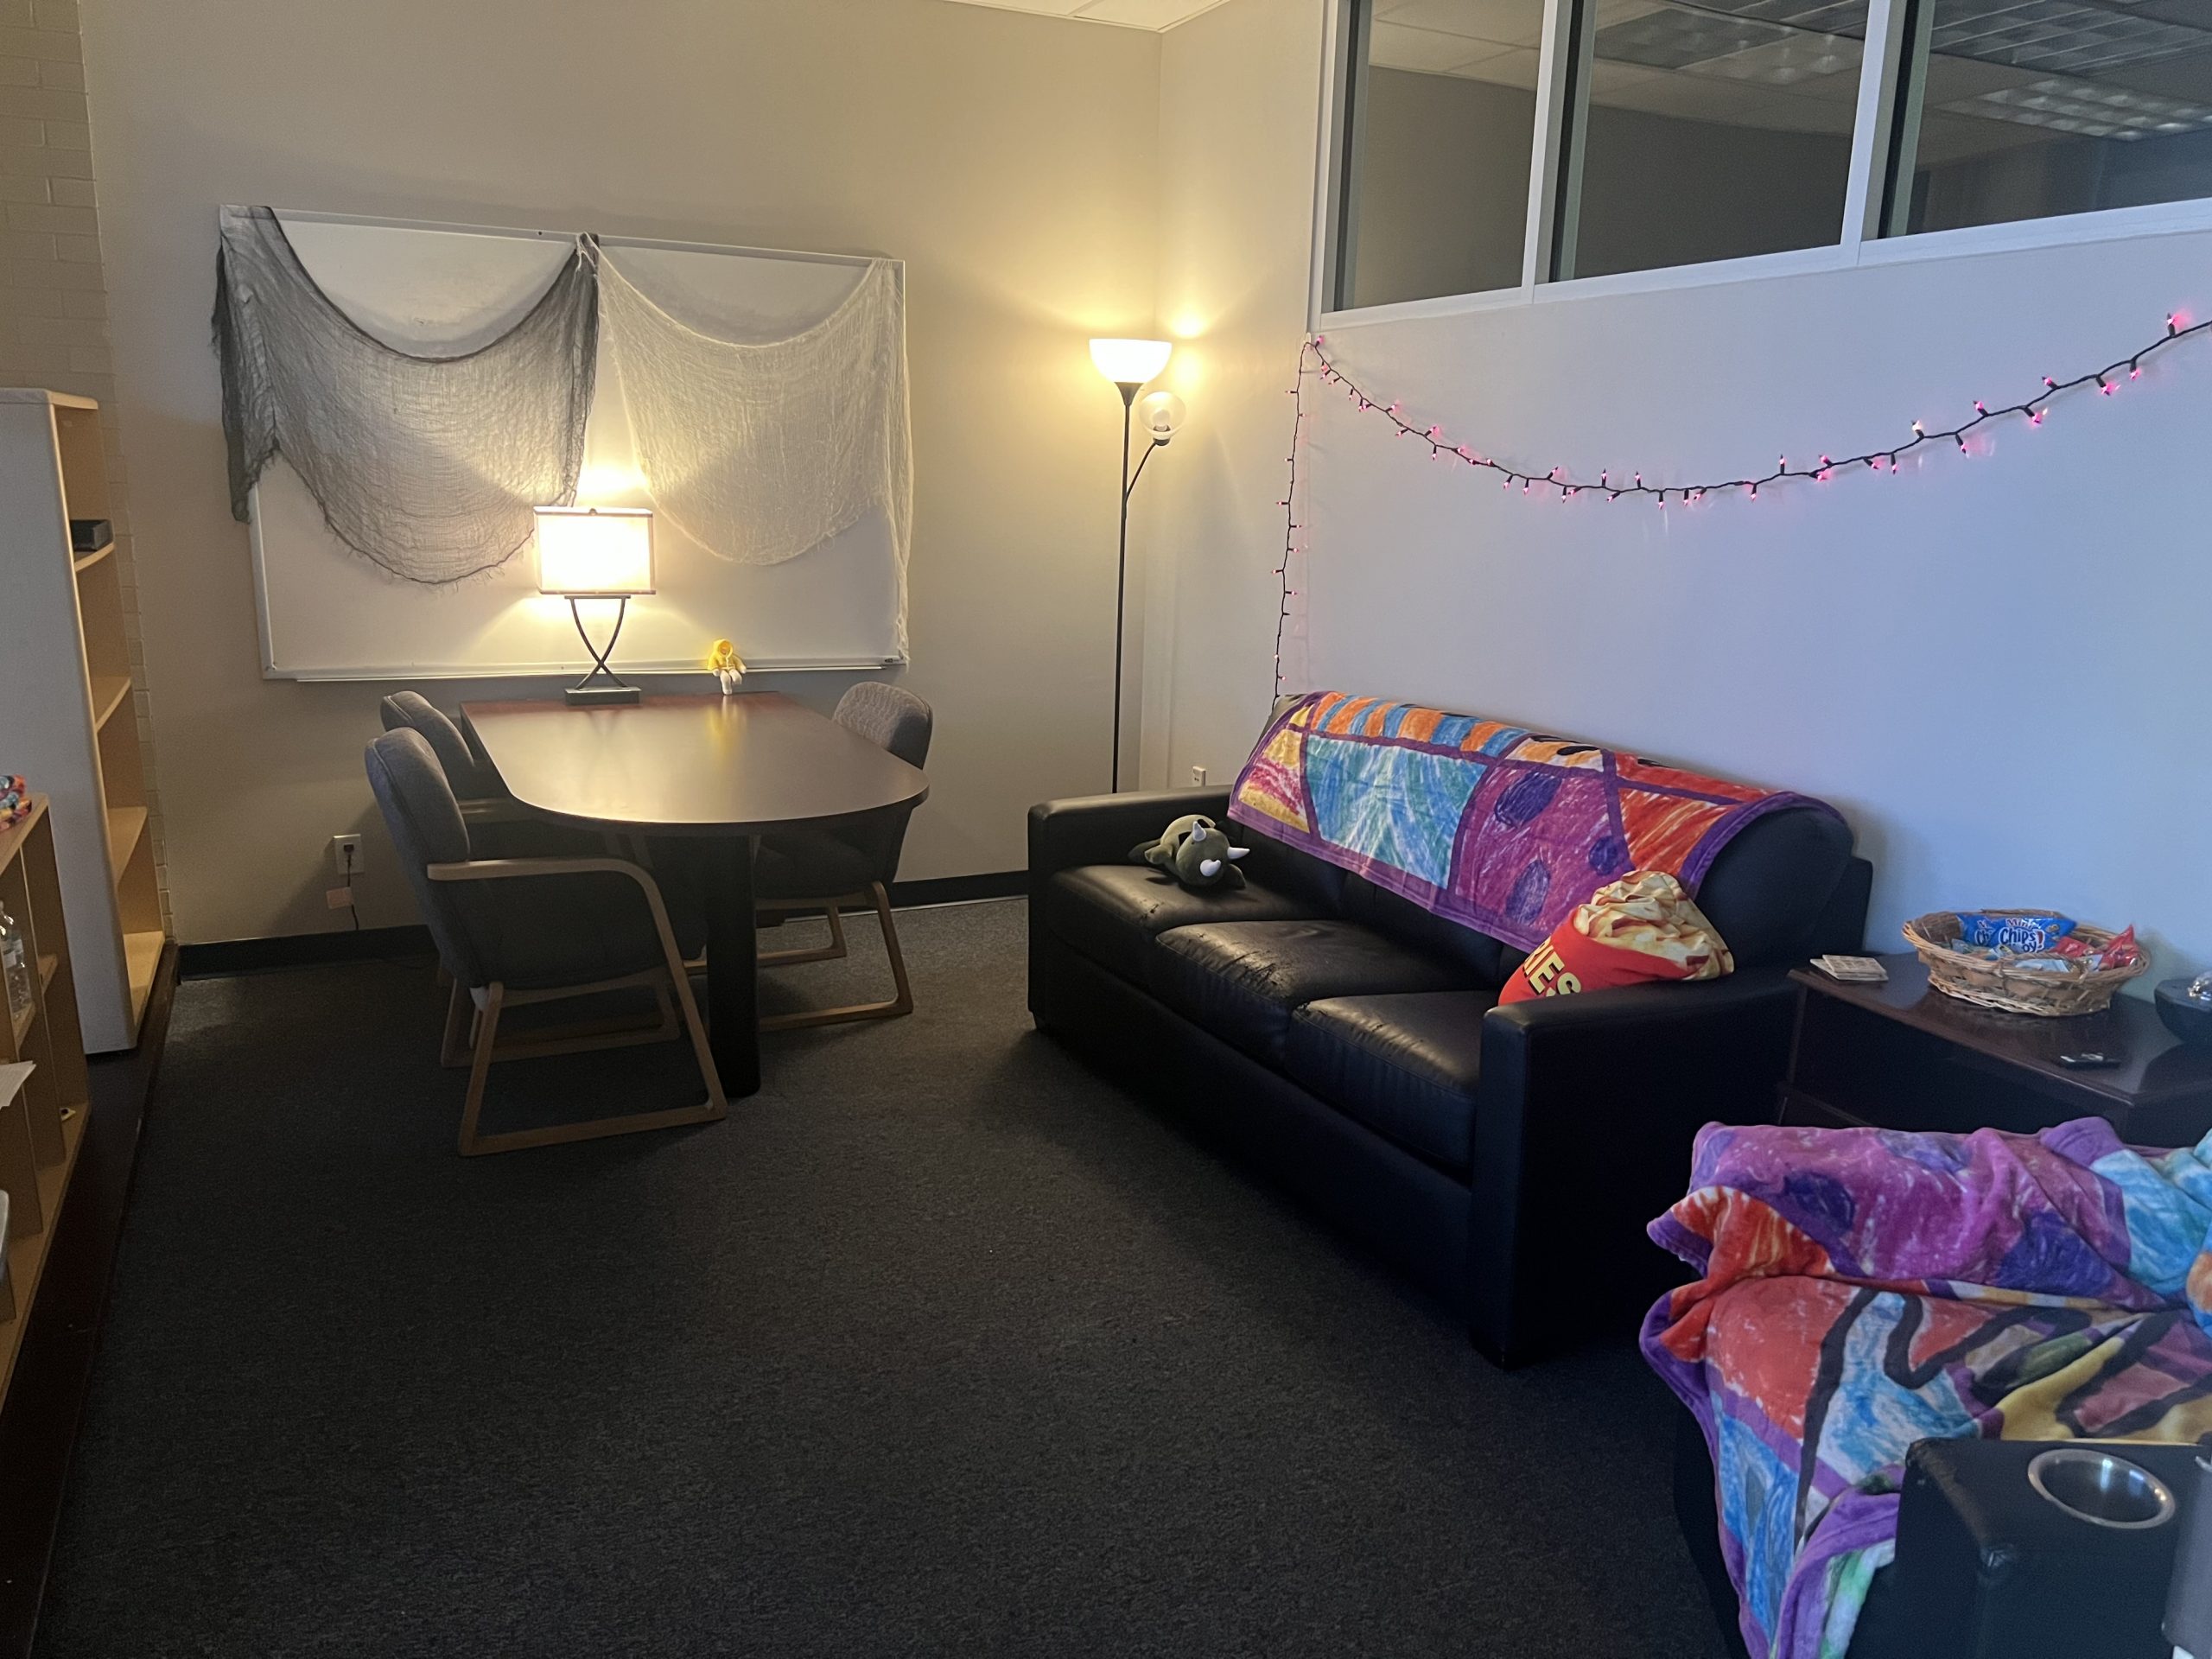 The AALC Introduces the Sensory Study Room